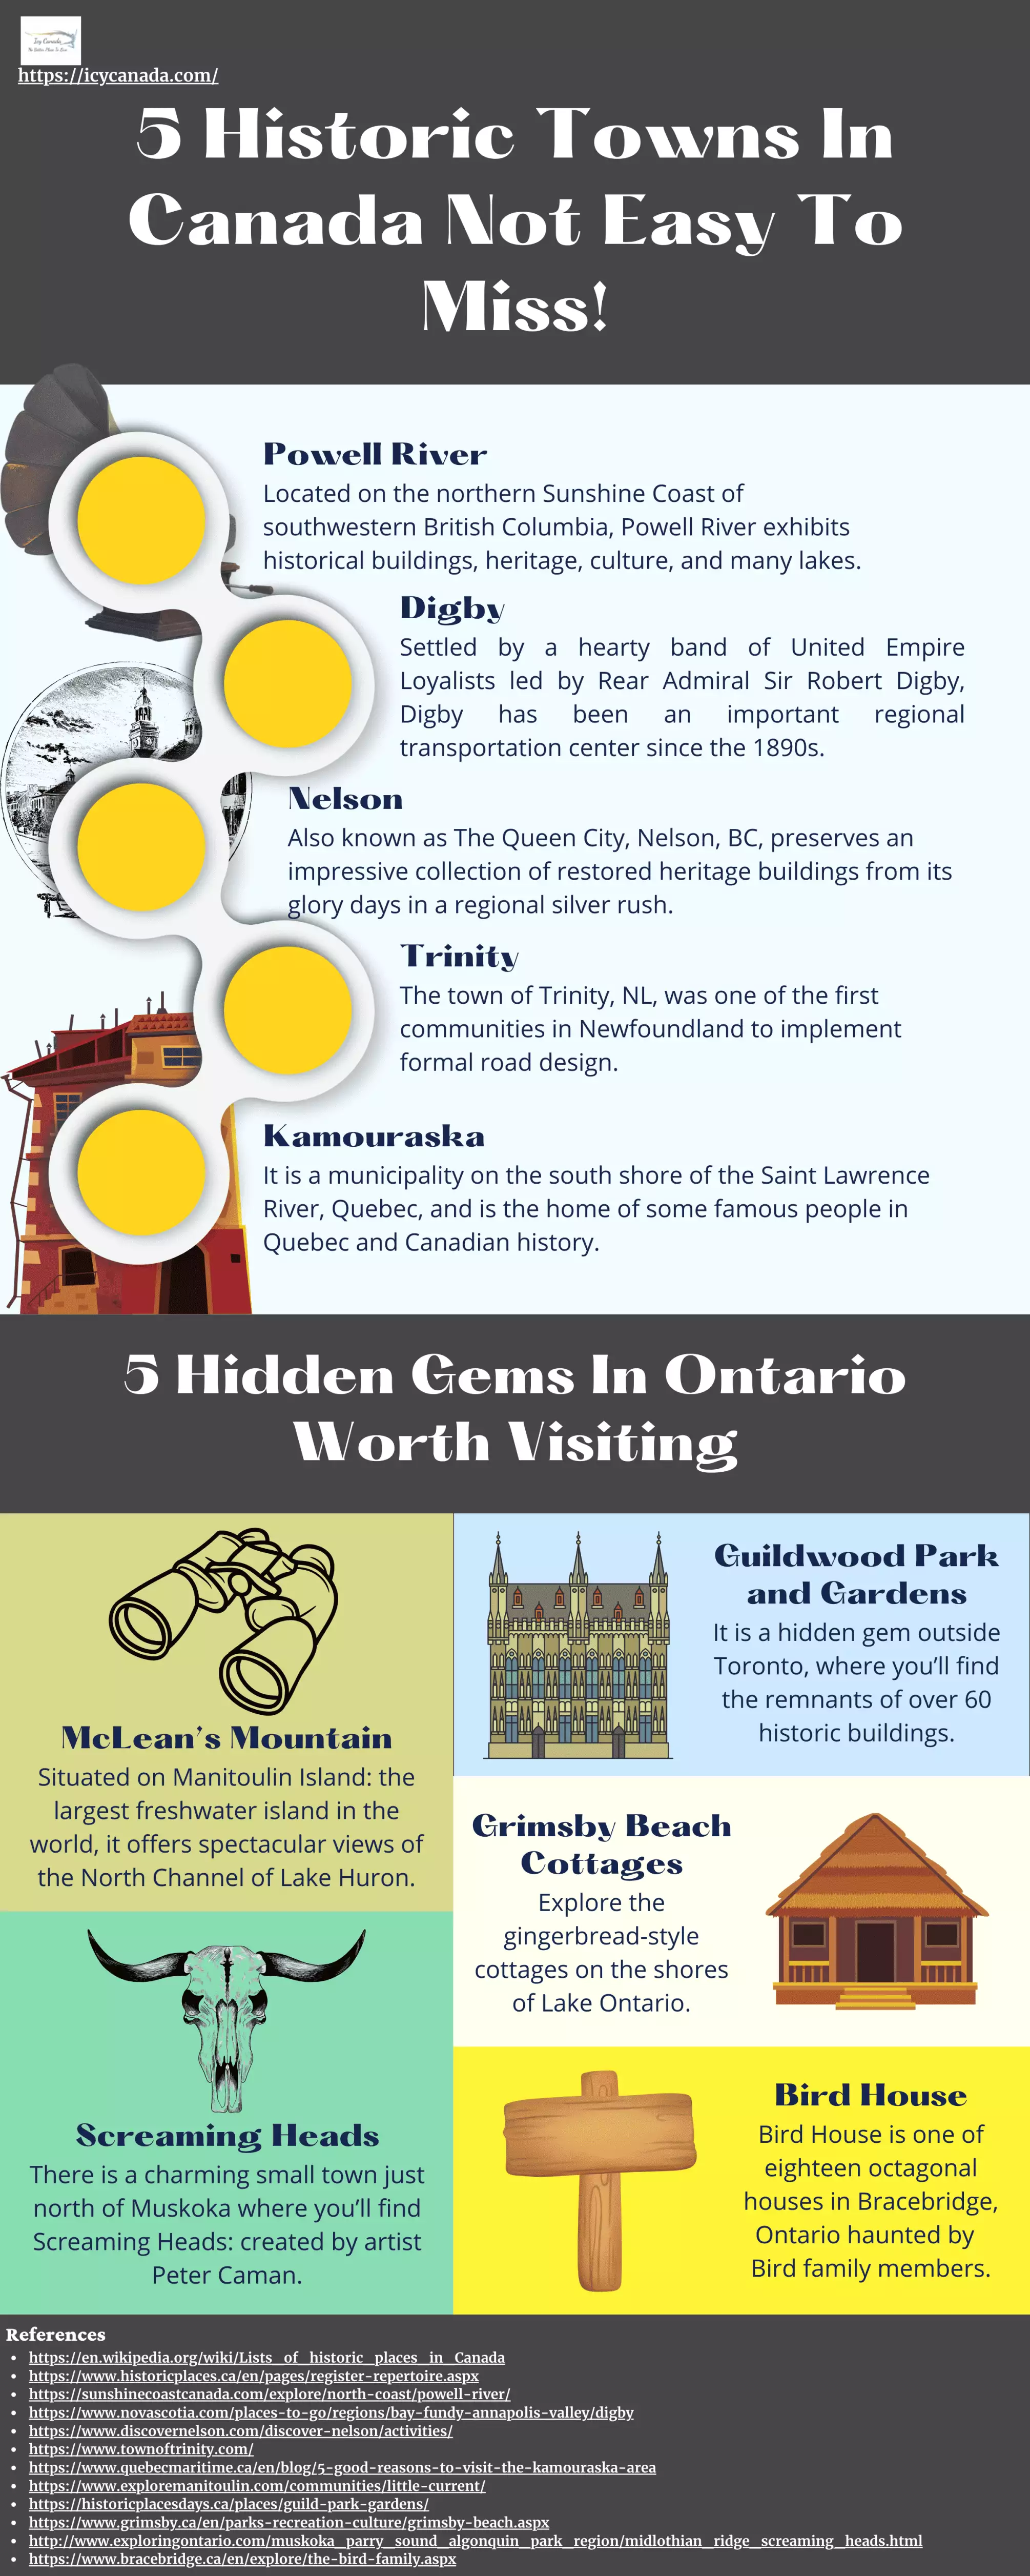 Infographic That Suggests 5 Historic Towns In Canada Not Easy To Miss!